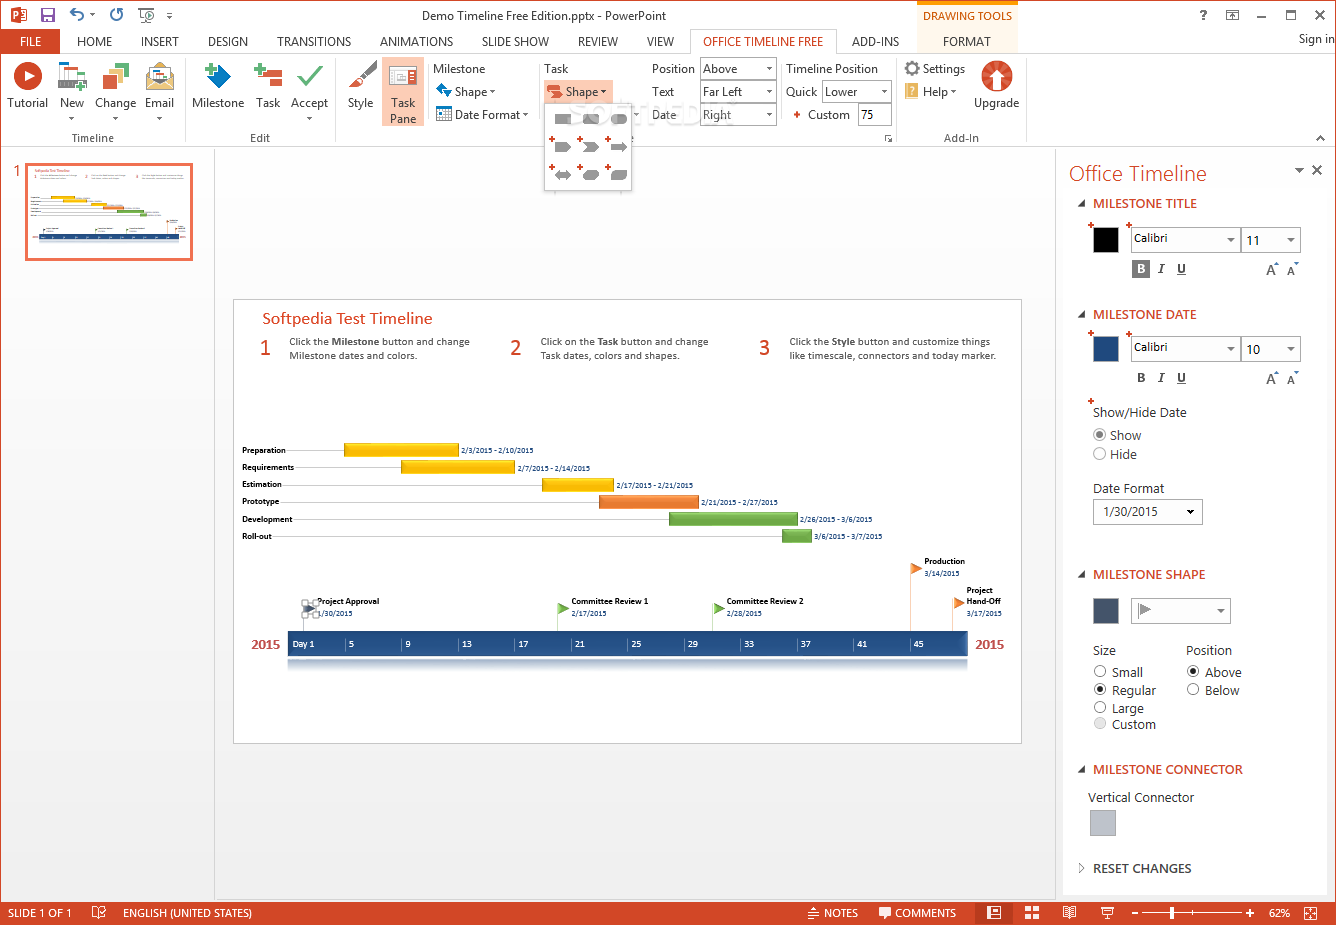 for iphone download Office Timeline Plus / Pro 7.04.00.00 free